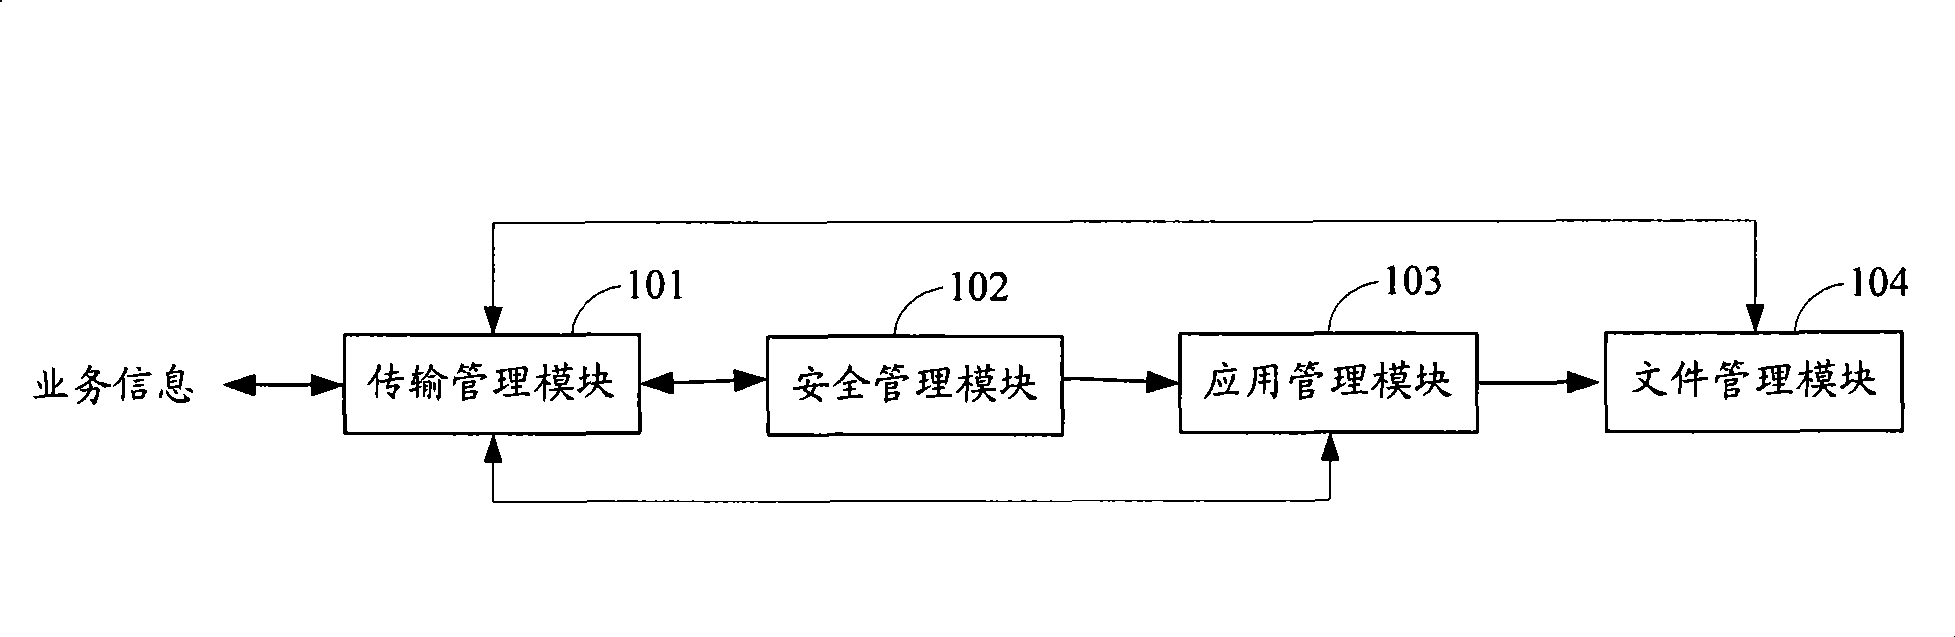 Operating system in double-interface smart card and its implementing method